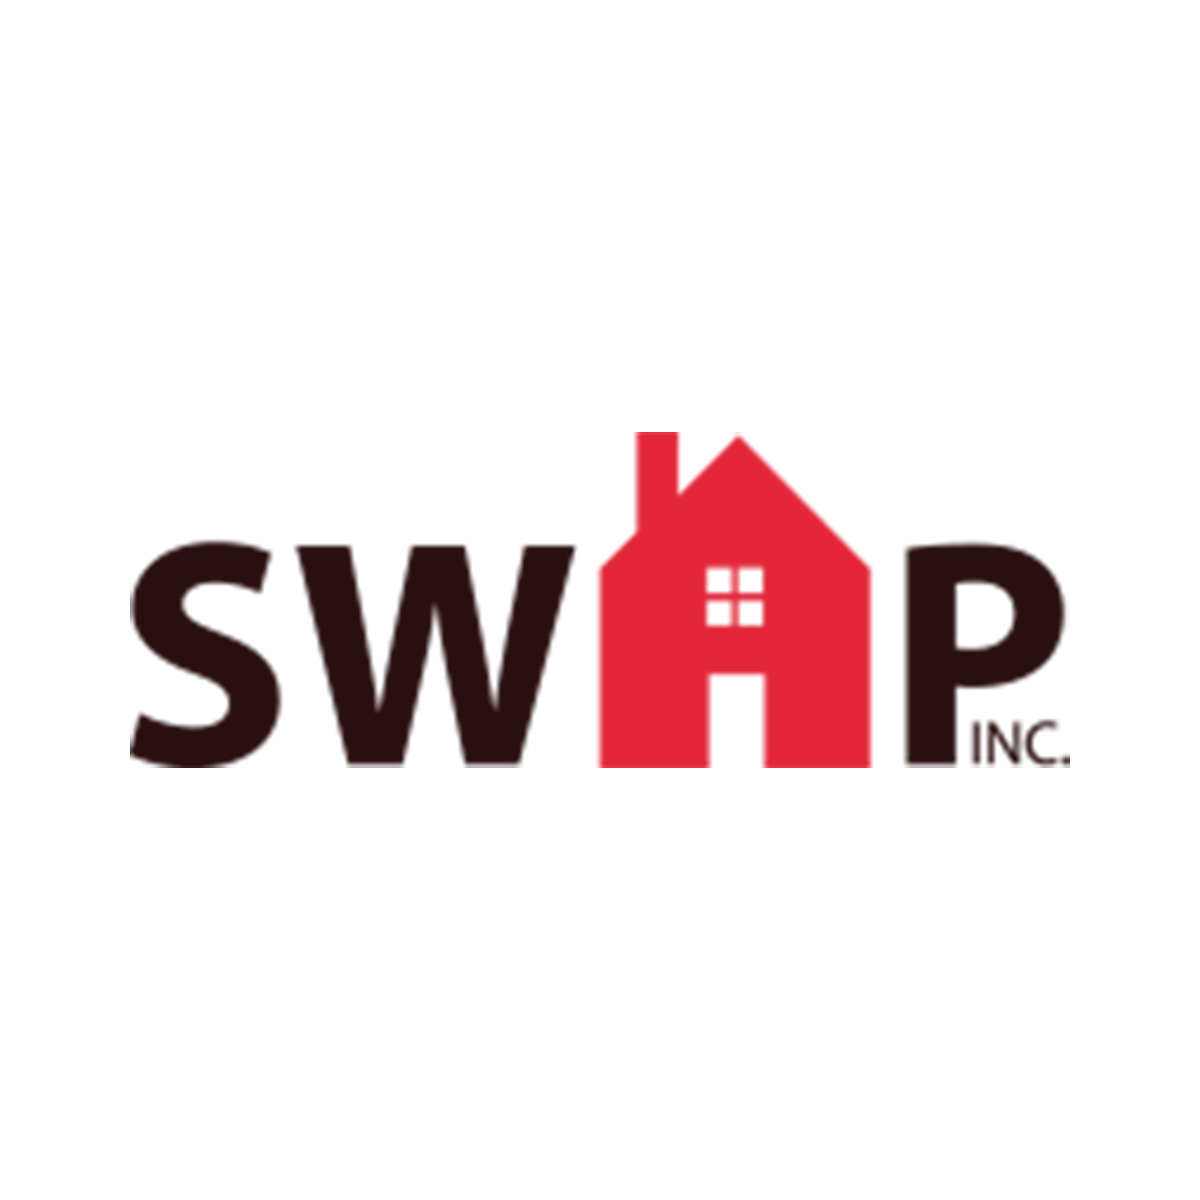 SWAP, Inc. (Stop Wasting Abandoned Property)